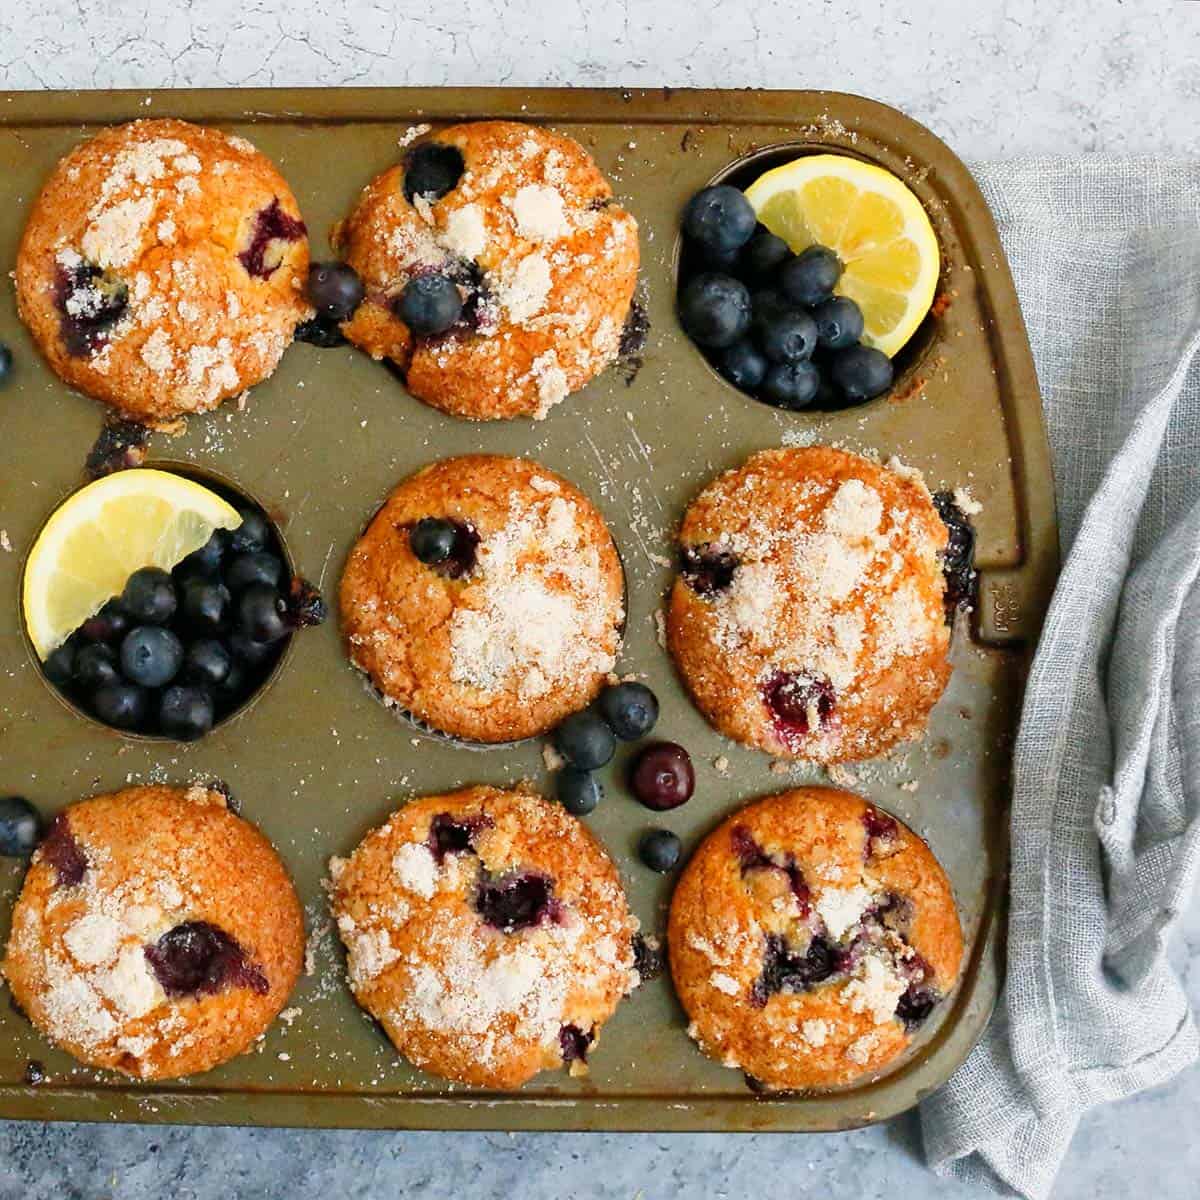 lemon blueberry muffins on a muffin pan garnished with blueberries and lemon slices